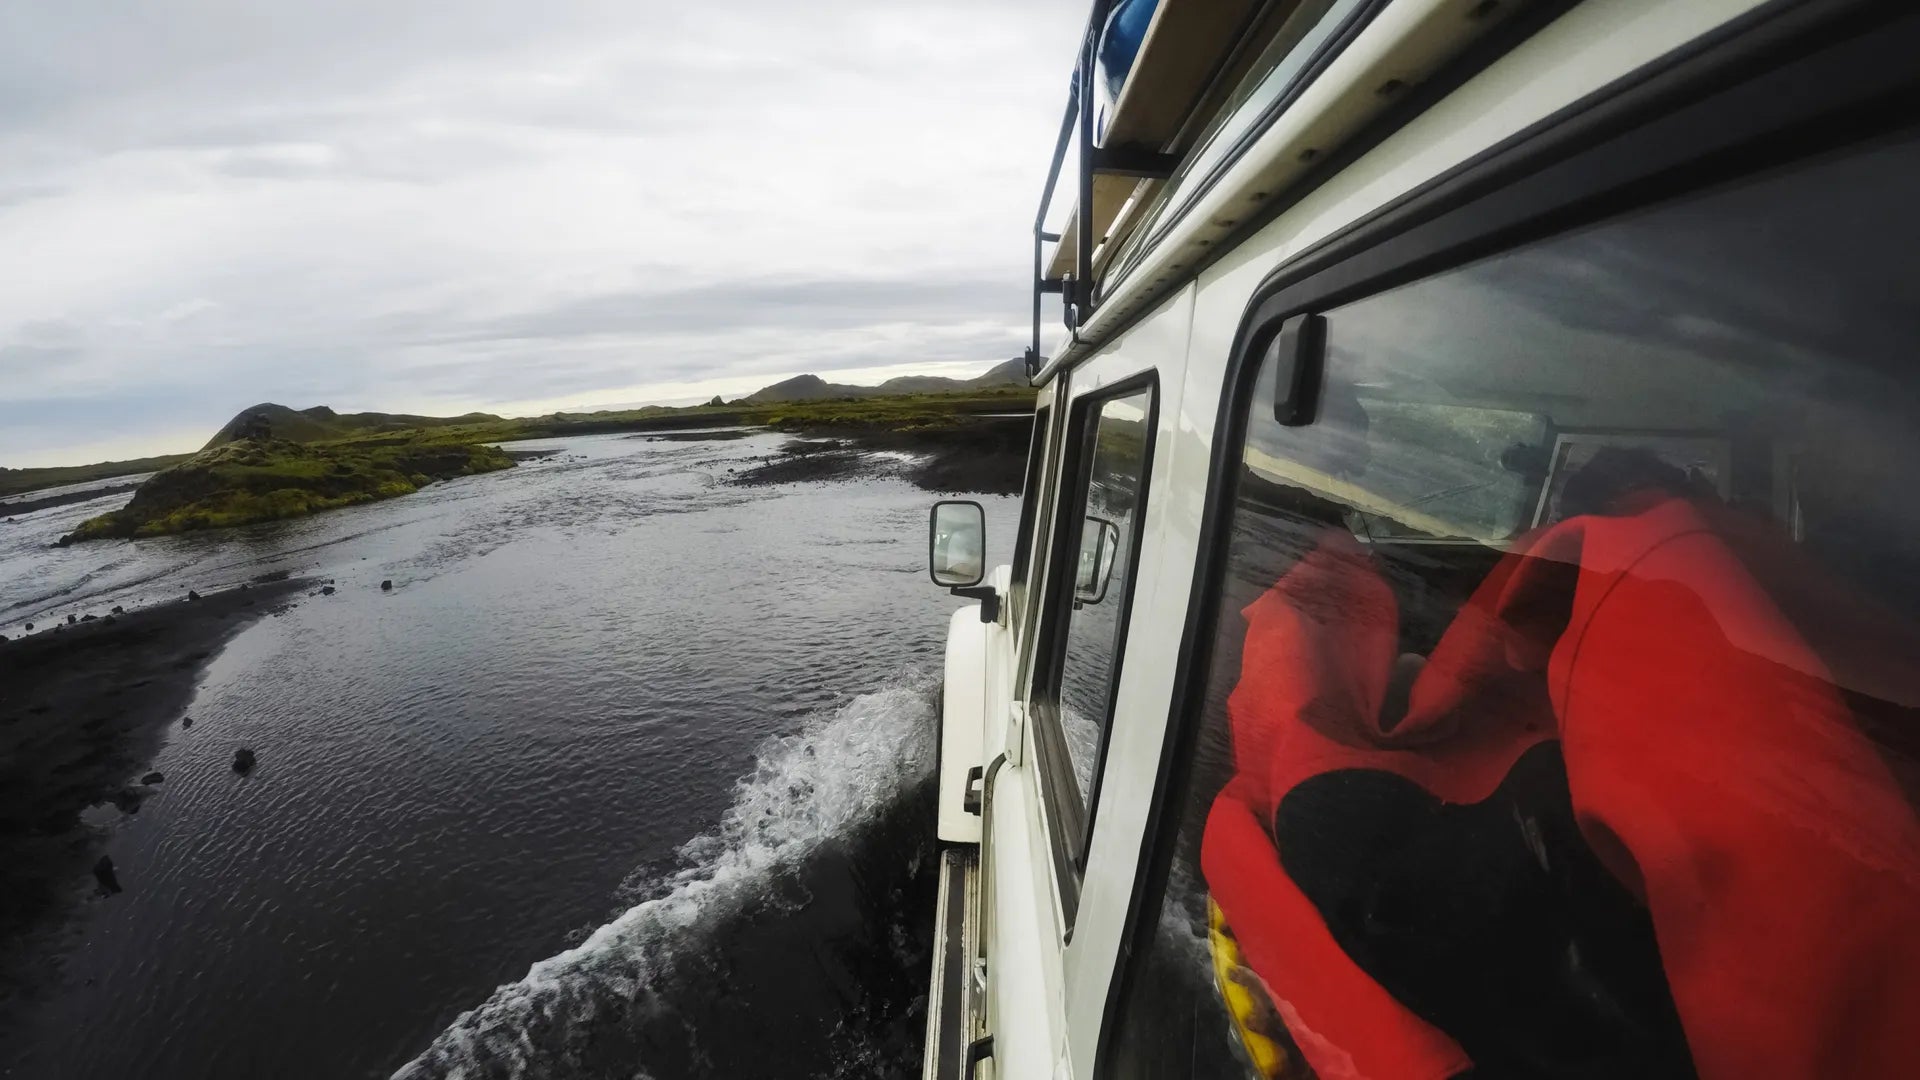 Exterior example photo from the suction cup mount on a land rover driving through a river